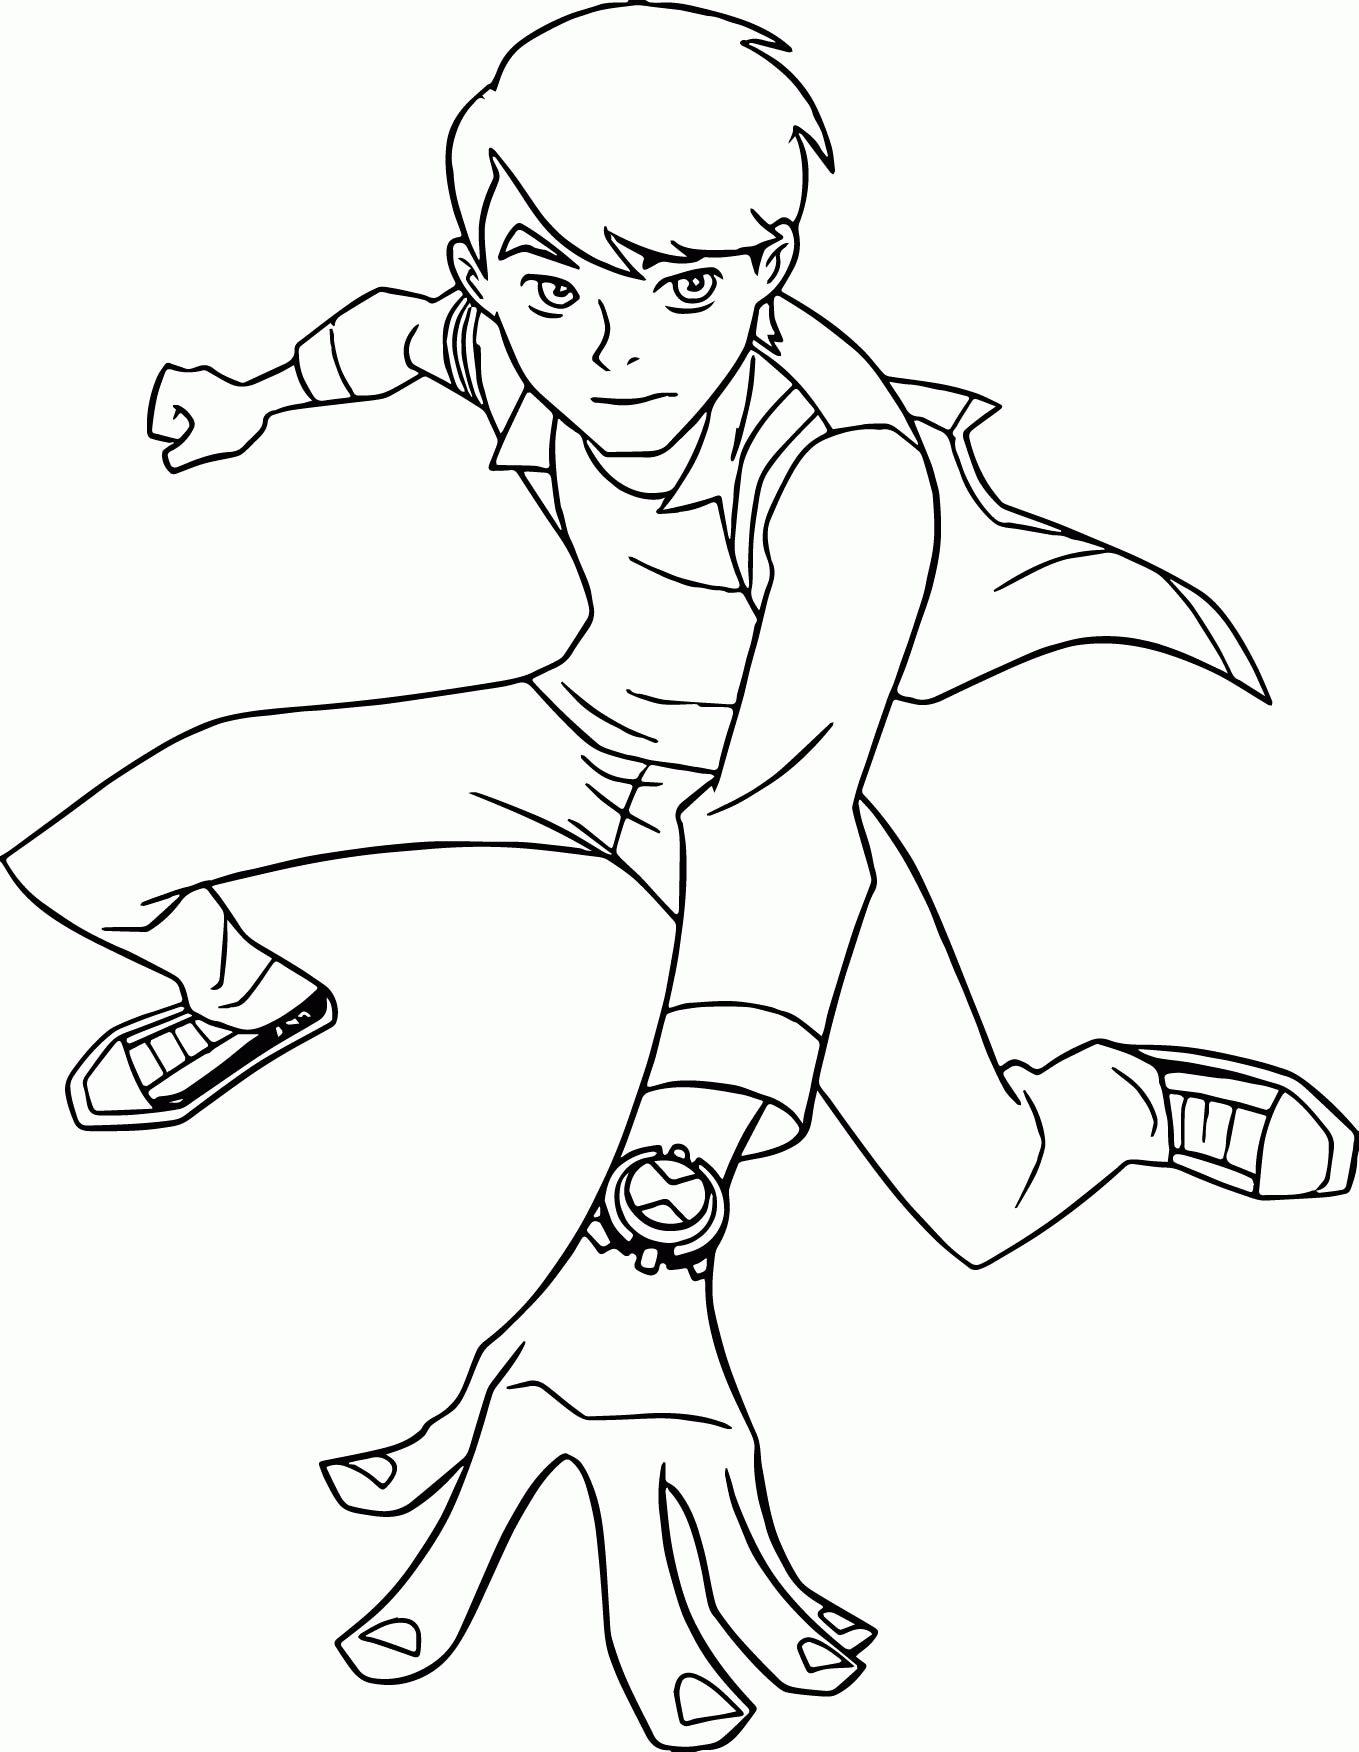 ben10 colouring ben 10 coloring pages free printable coloring pages colouring ben10 